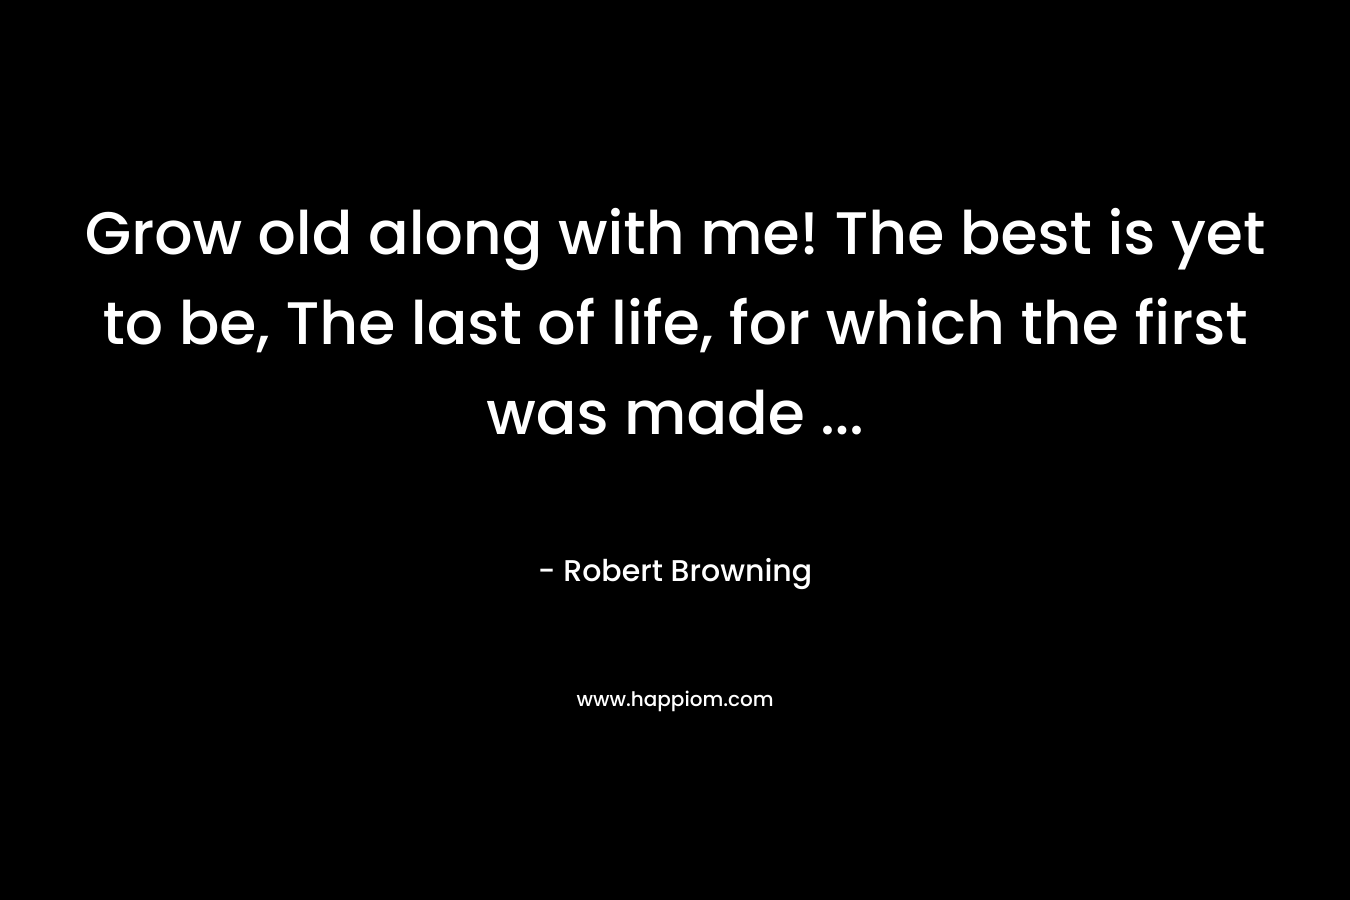 Grow old along with me! The best is yet to be, The last of life, for which the first was made … – Robert Browning